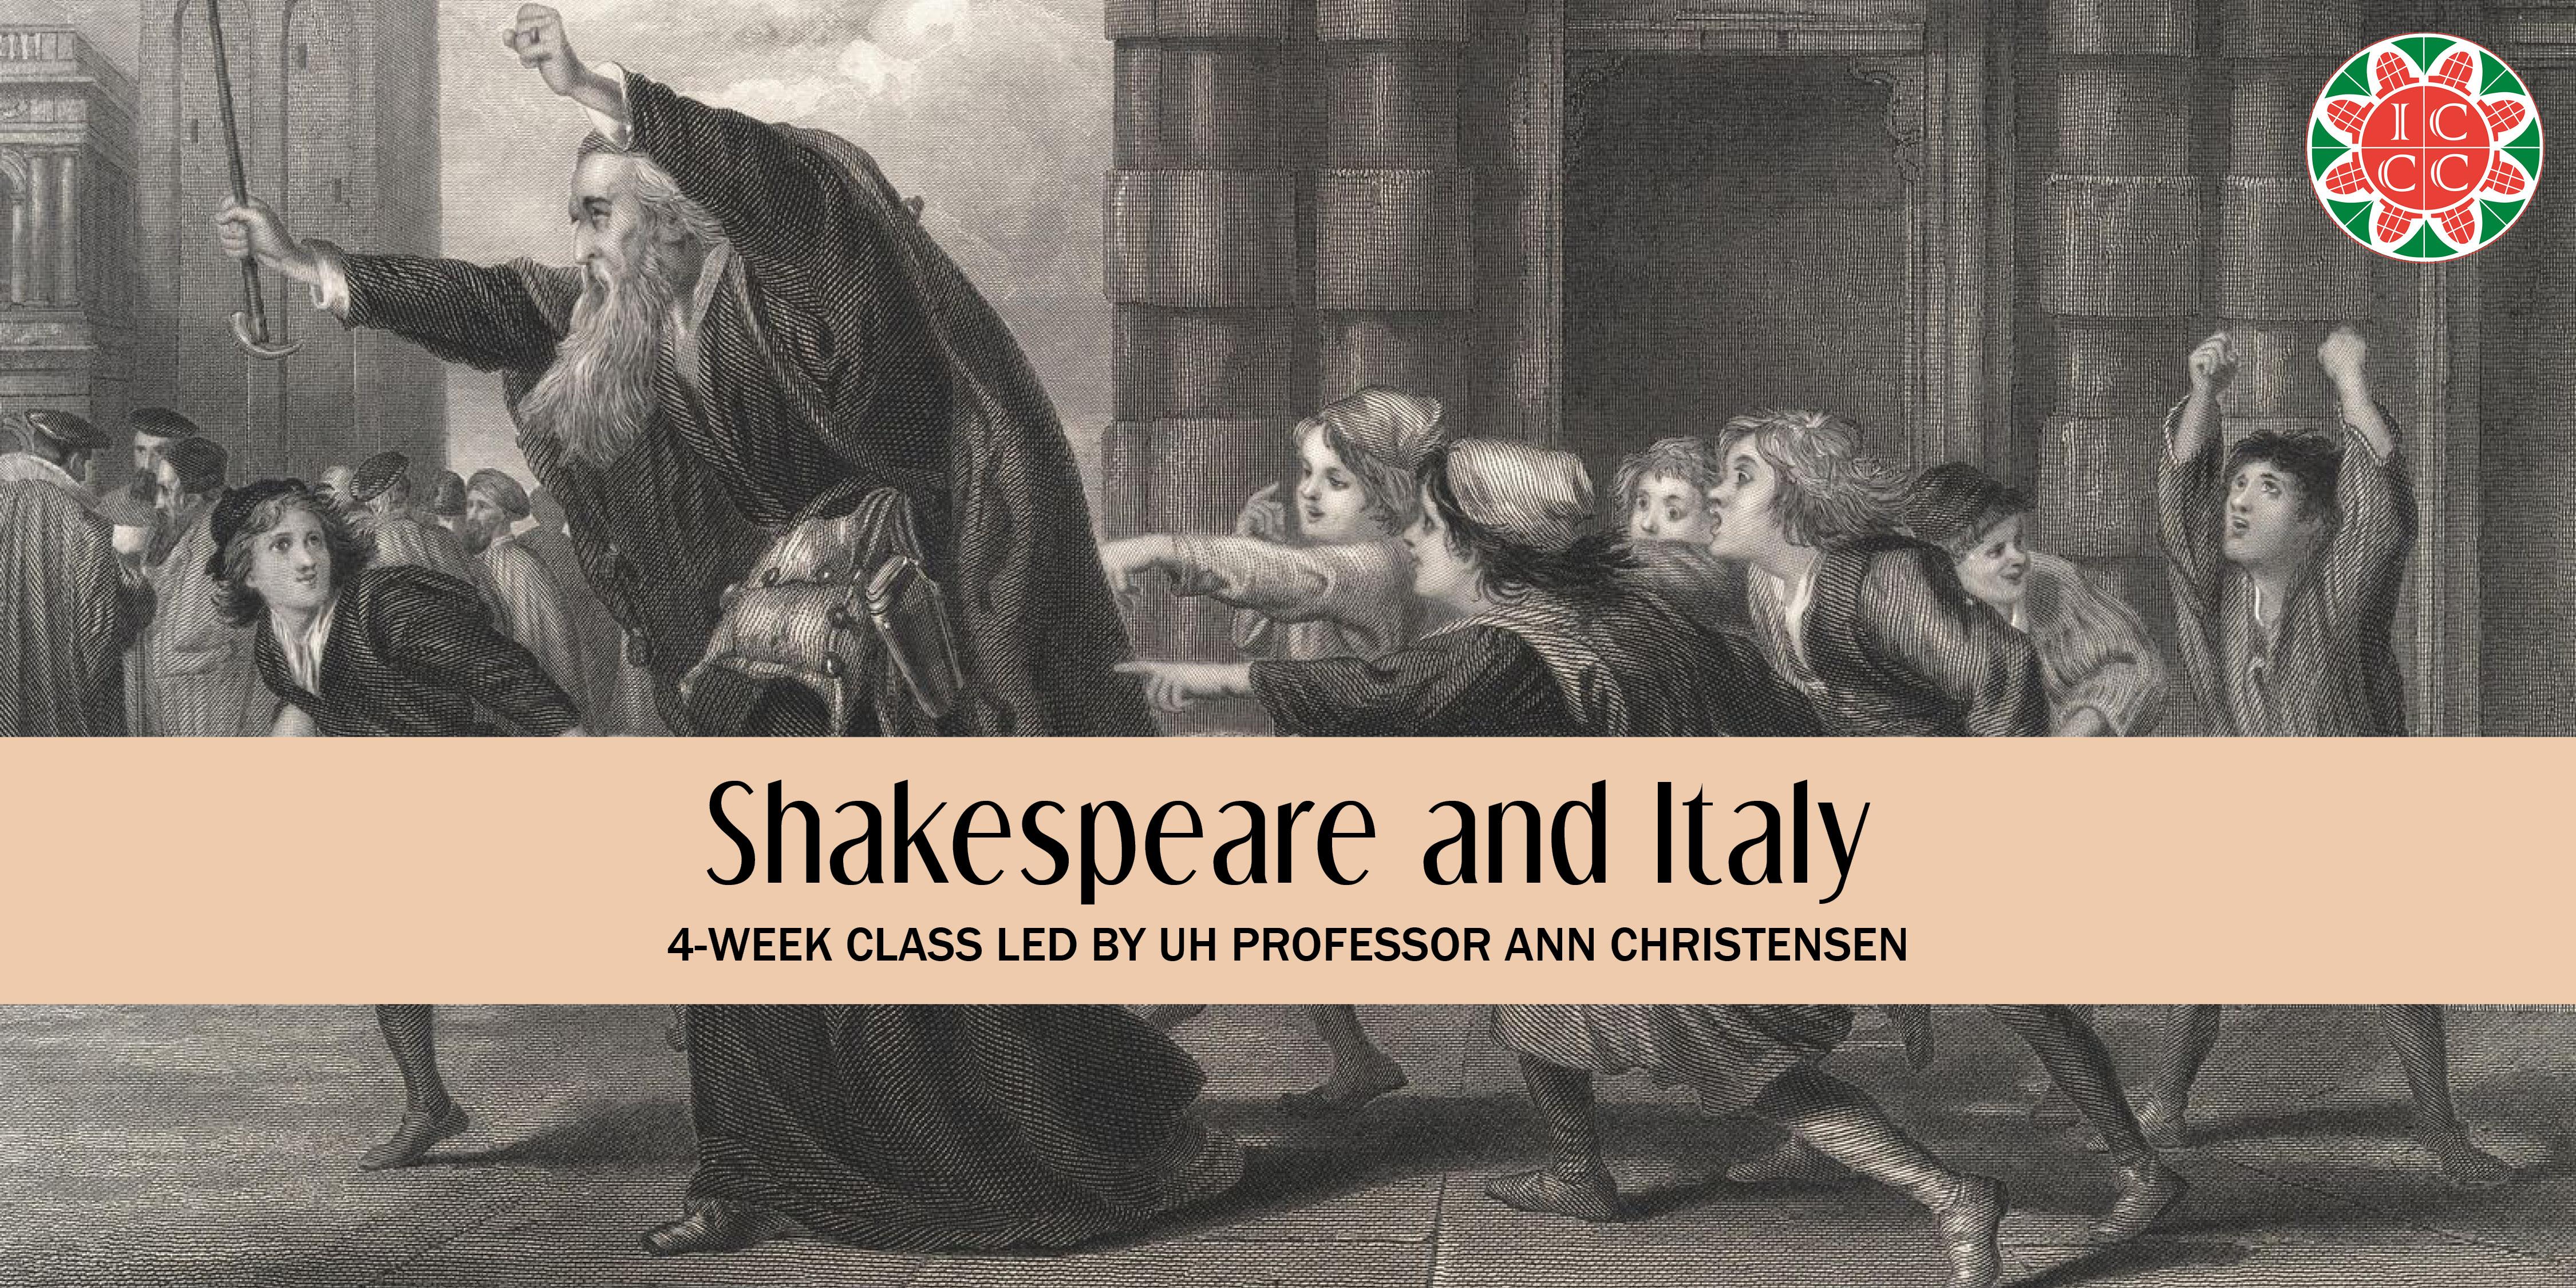 Shakespeare and Italy - Cultural Enrichment Class